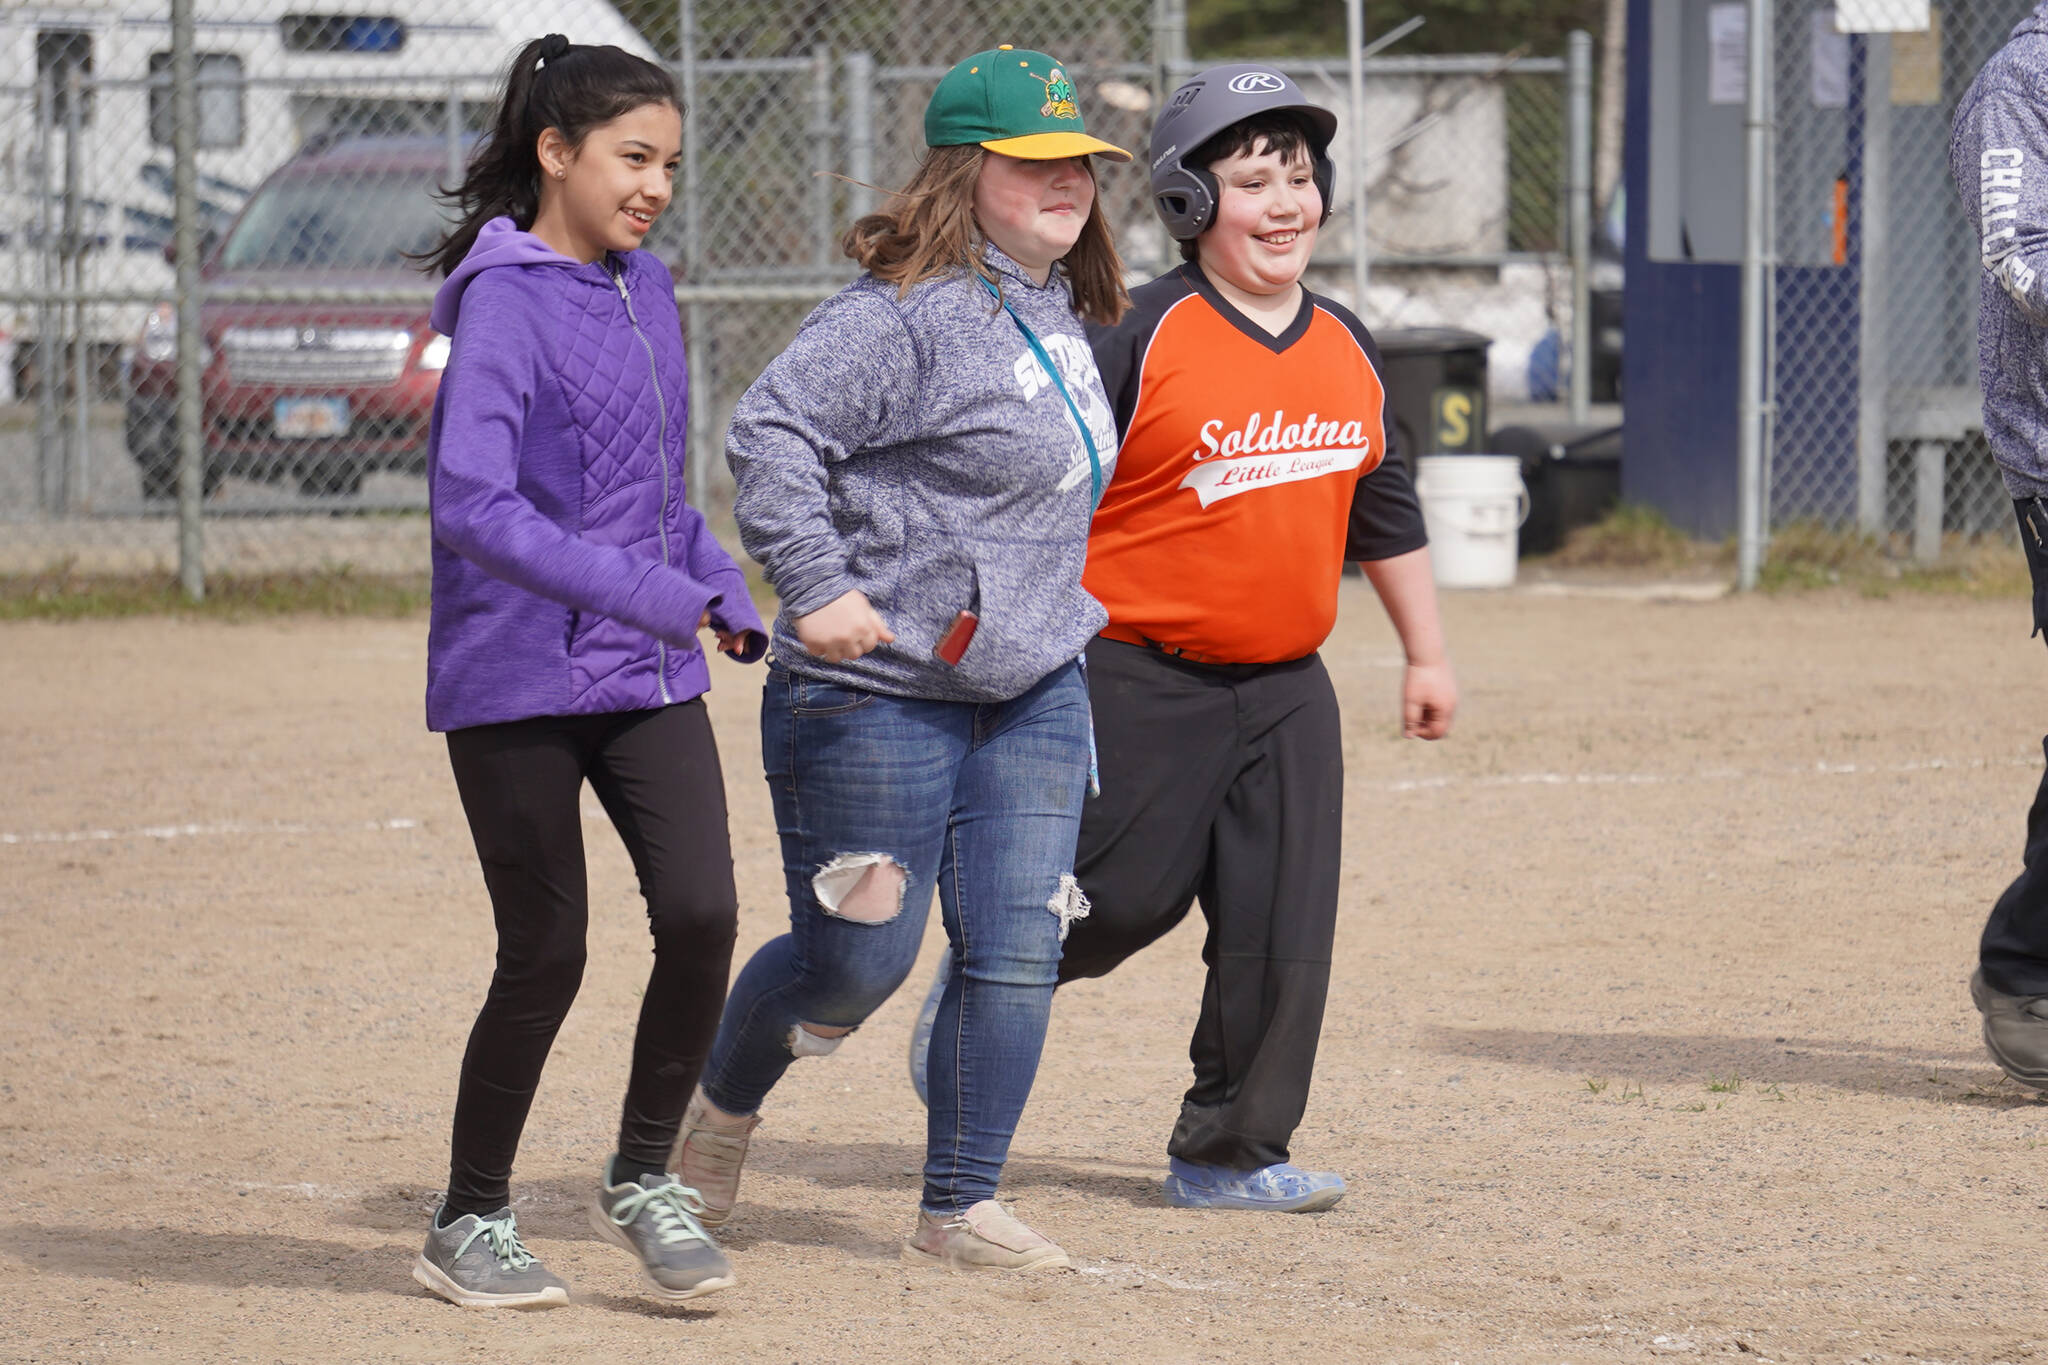 Lila Dockins, MaKenna DesOrmeaux, and Jaeger Romatz run together during Soldotna Little League Challenger Program game at the Little League Fields in Soldotna, Alaska on Saturday, May 20, 2023. (Jake Dye/Peninsula Clarion)